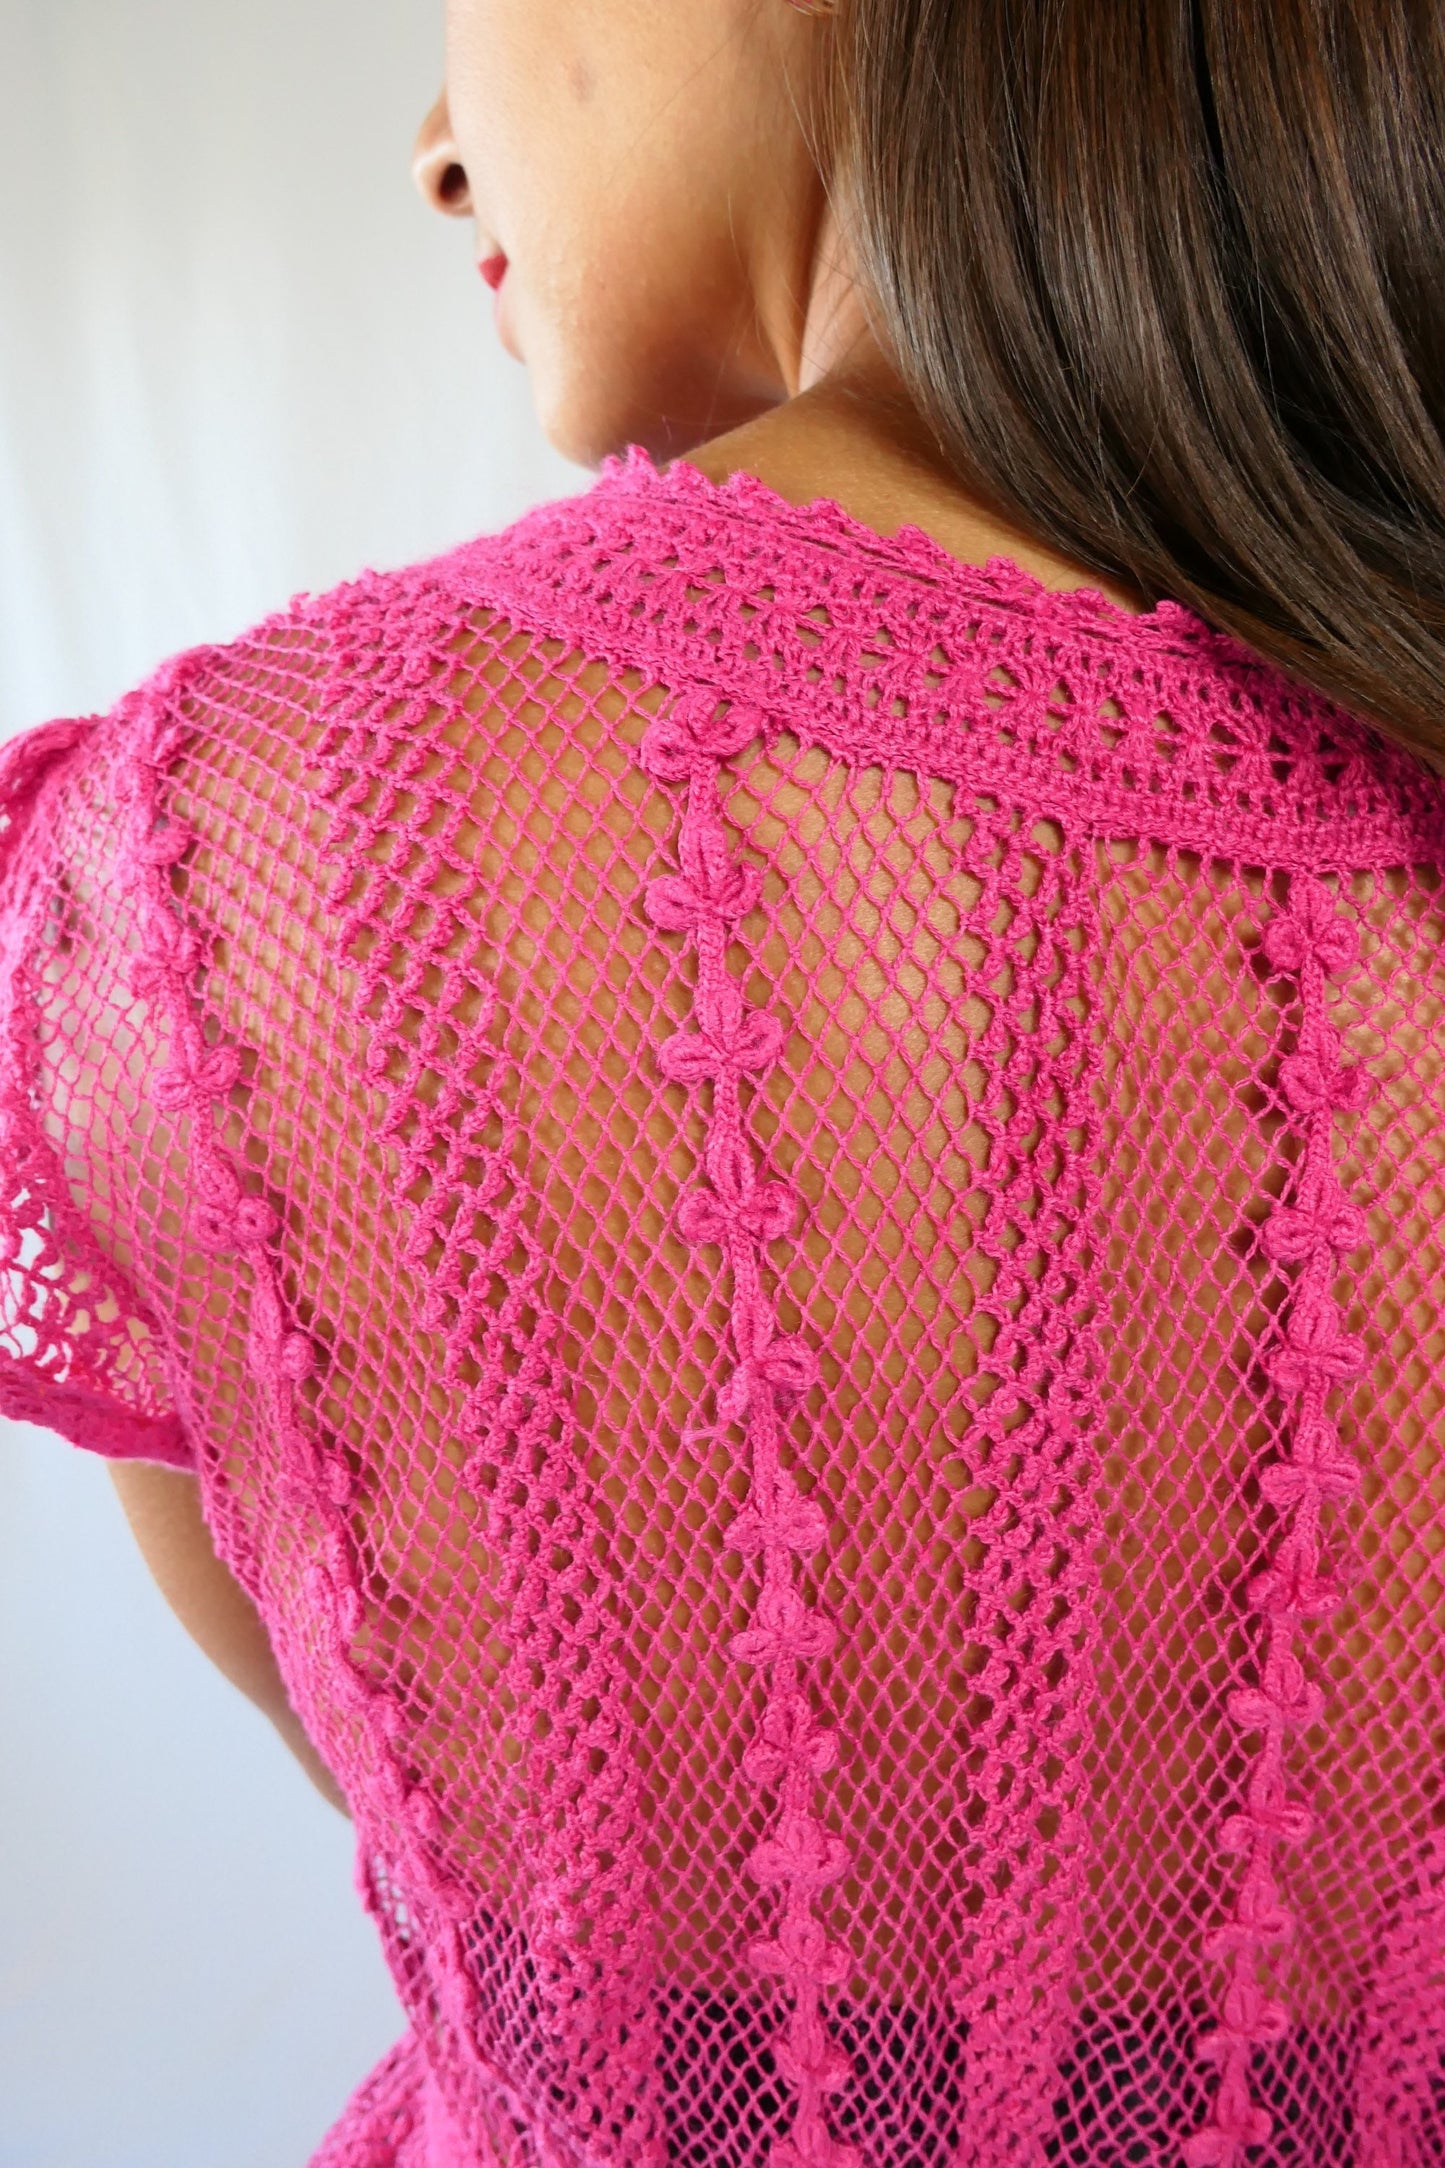 close-up view of back.  Delicate mesh pattern hand crocheted short puff sleeve top in a pretty fuschia pink!  This top has a high waist and flared hem. This is a Lim’s original vintage piece from the 1980s with trim added recently to finish the hem.  The top is reversible and can be buttoned up the front or back.  